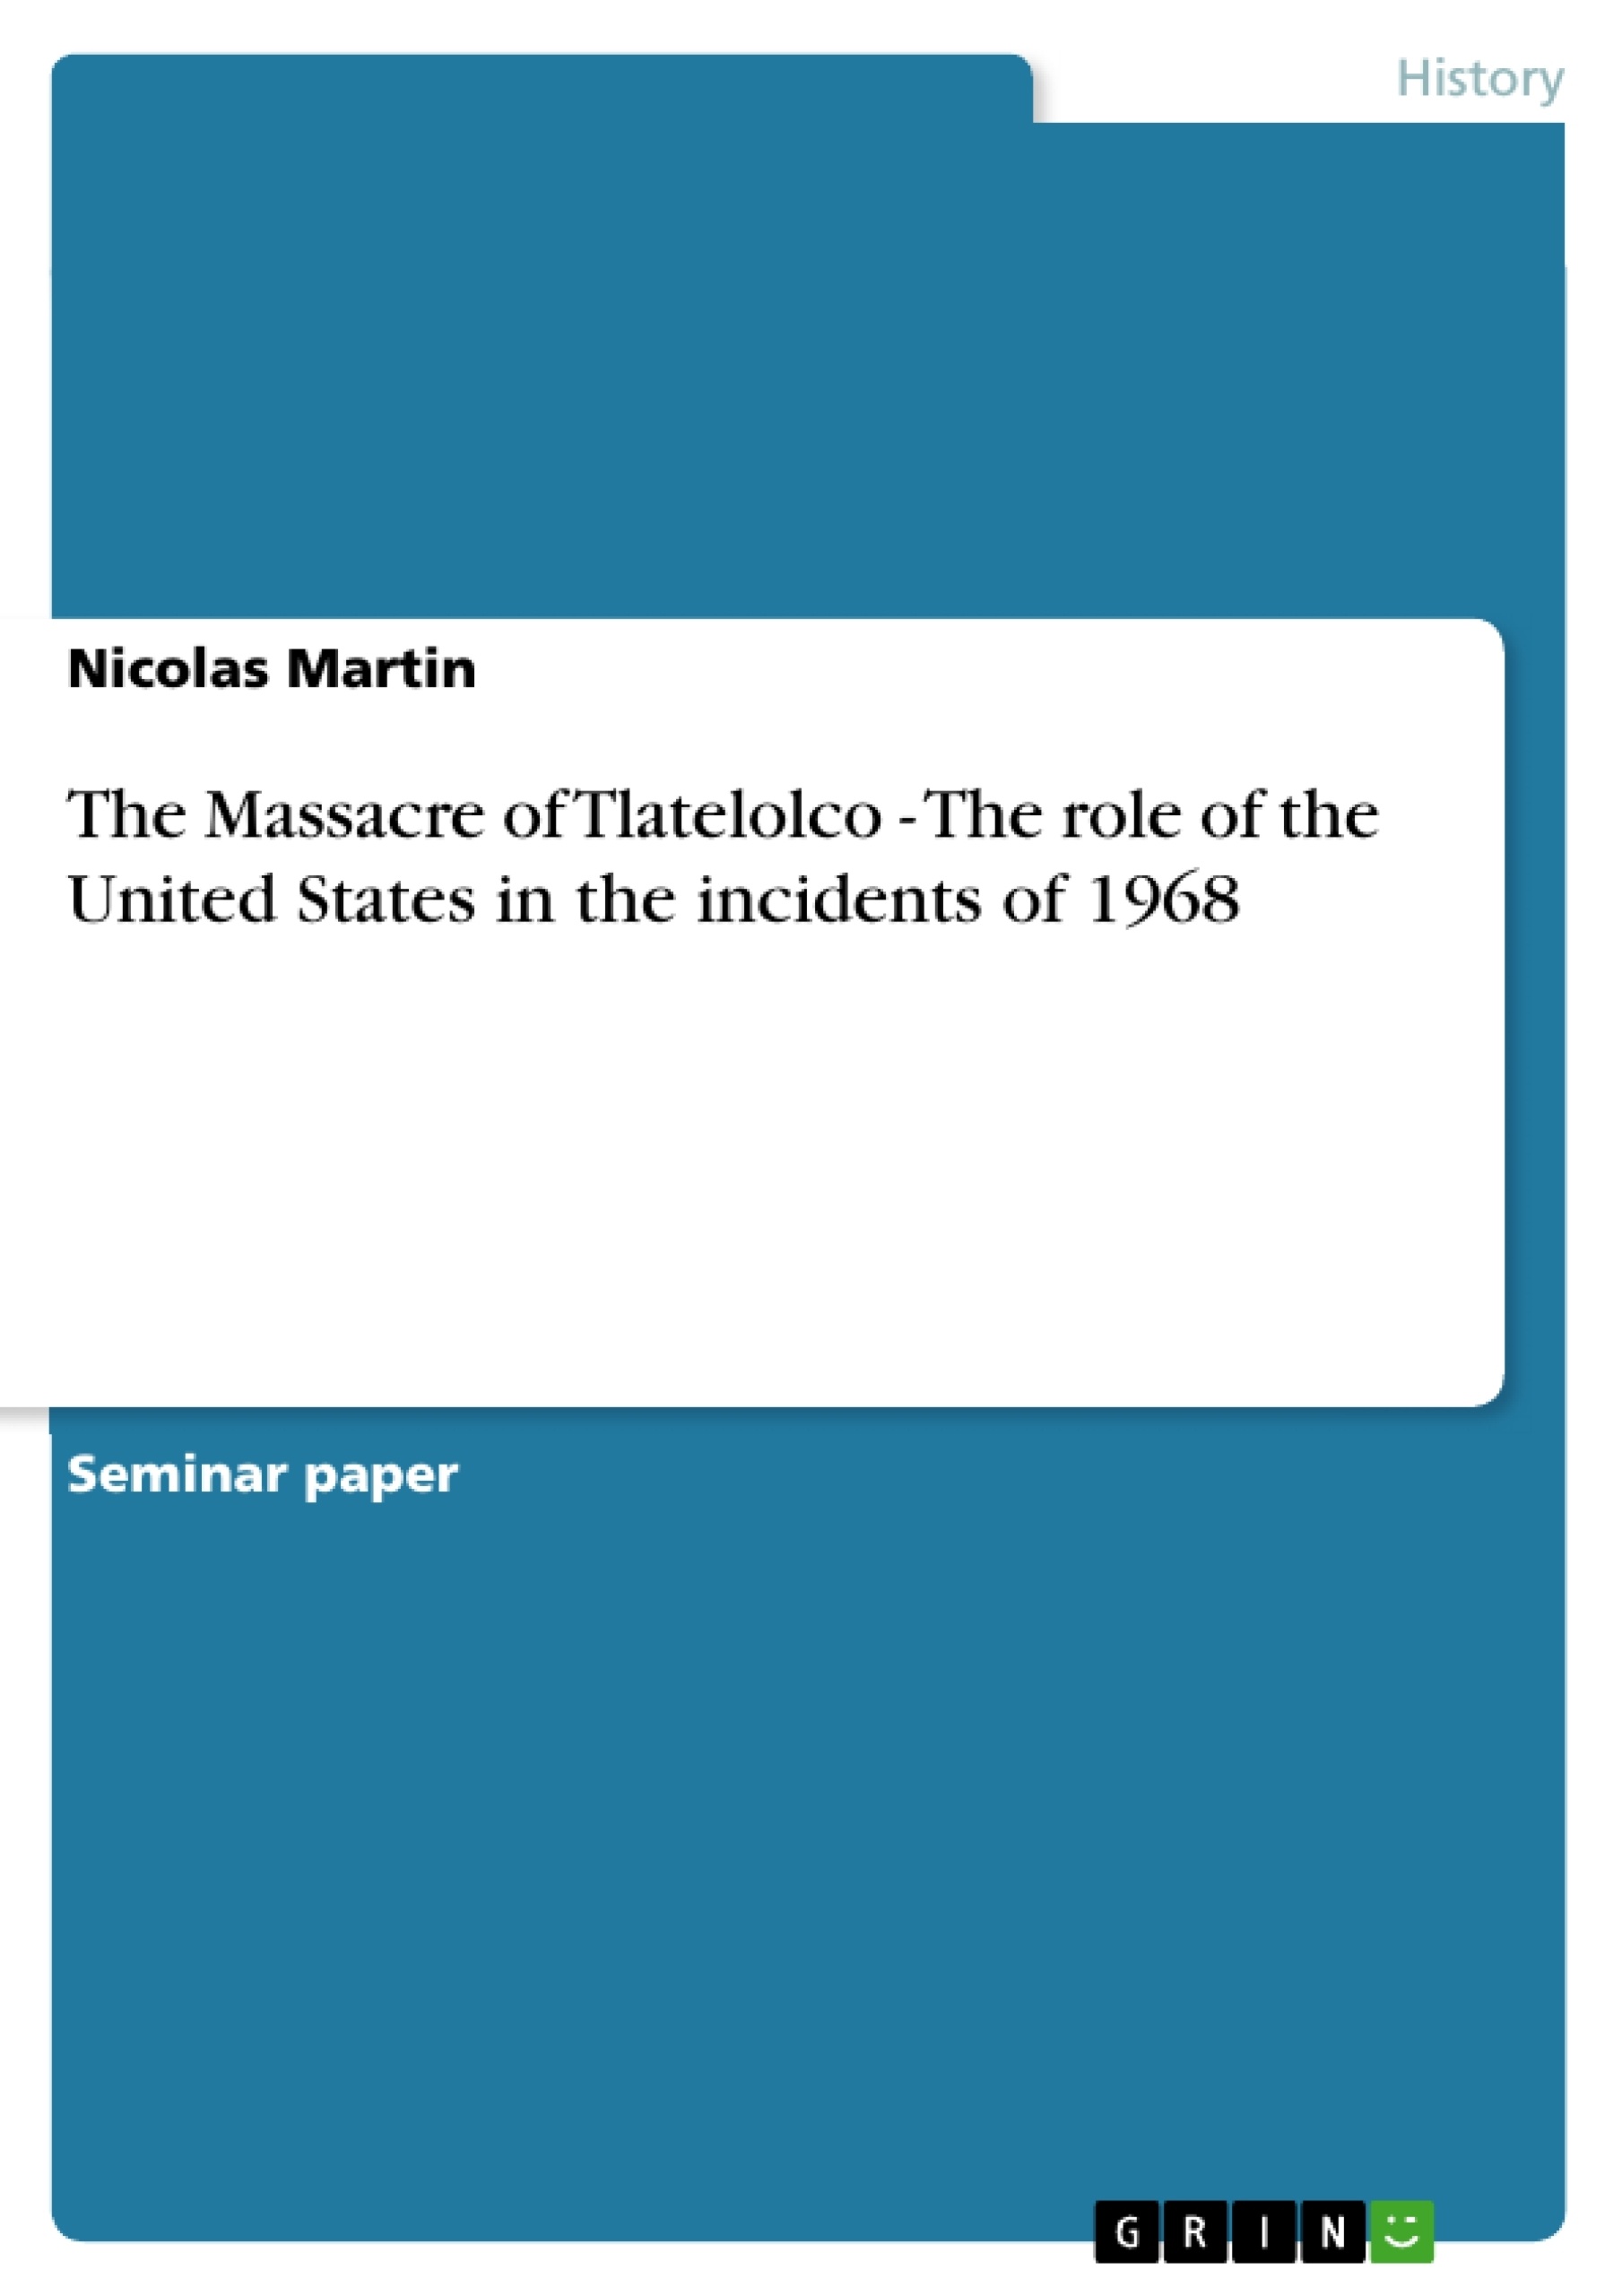 Titre: The Massacre of Tlatelolco - The role of the United States in the incidents of 1968